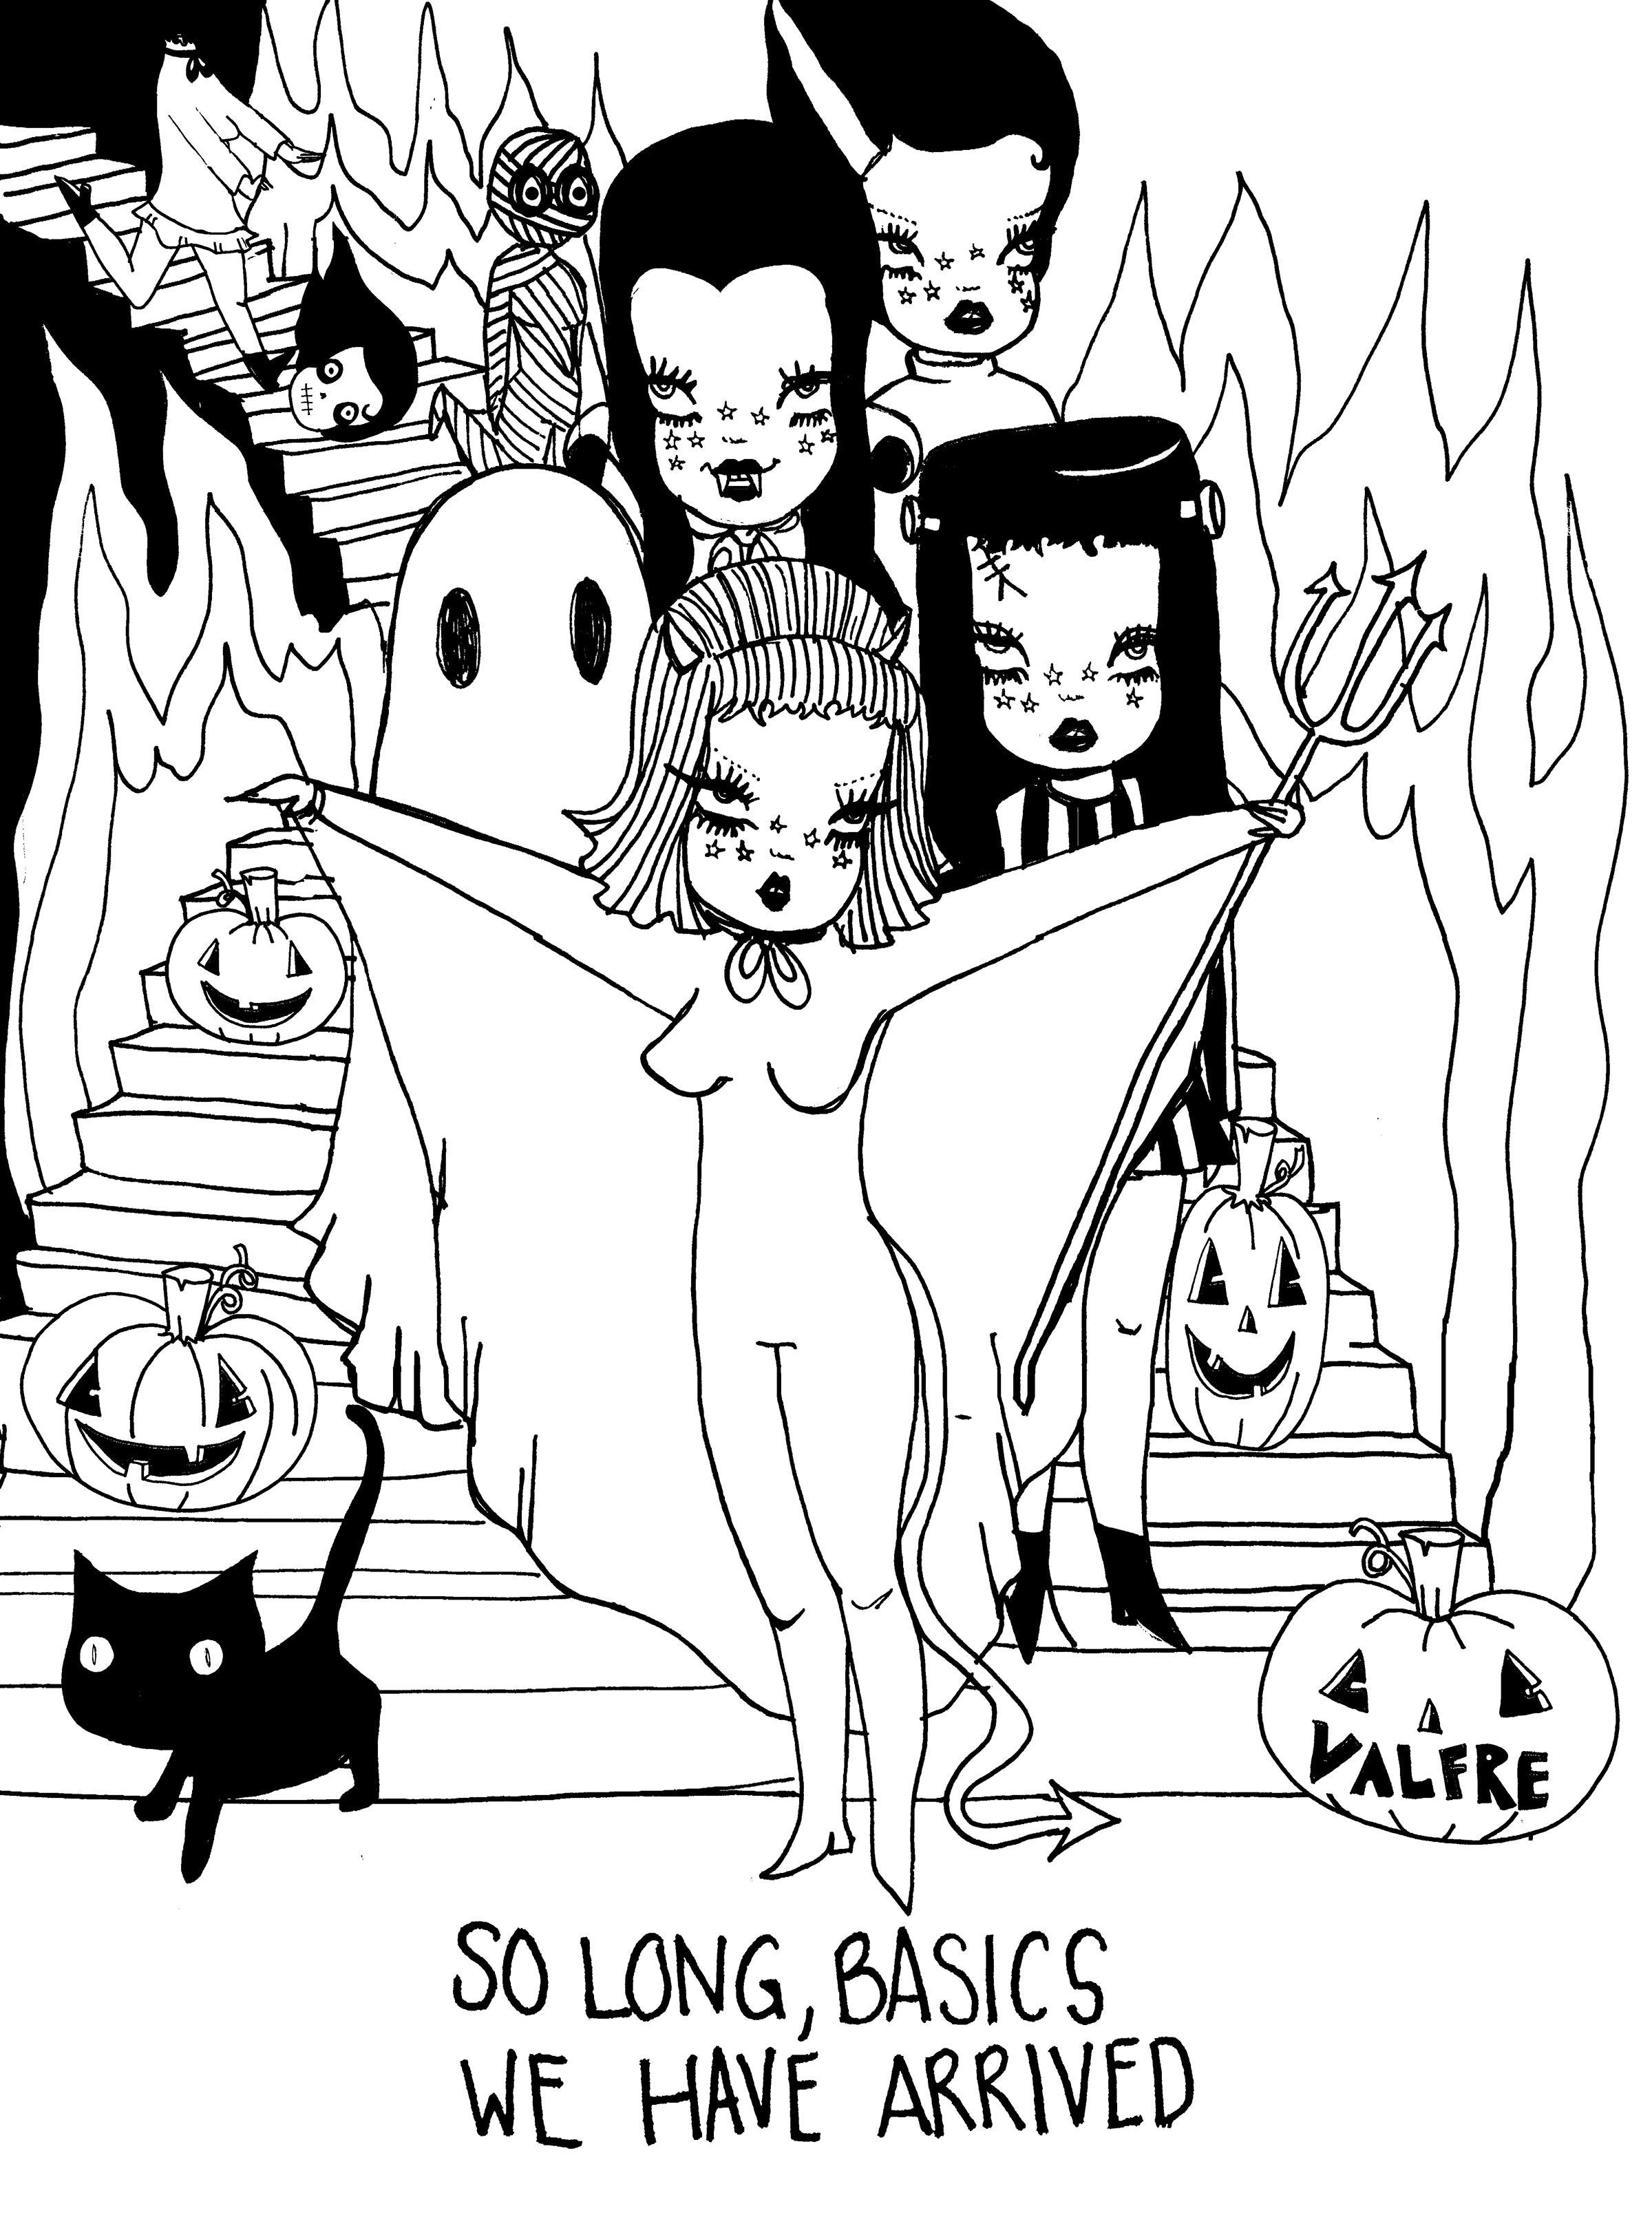 Valfrecolorme Coloring Pages Valfre